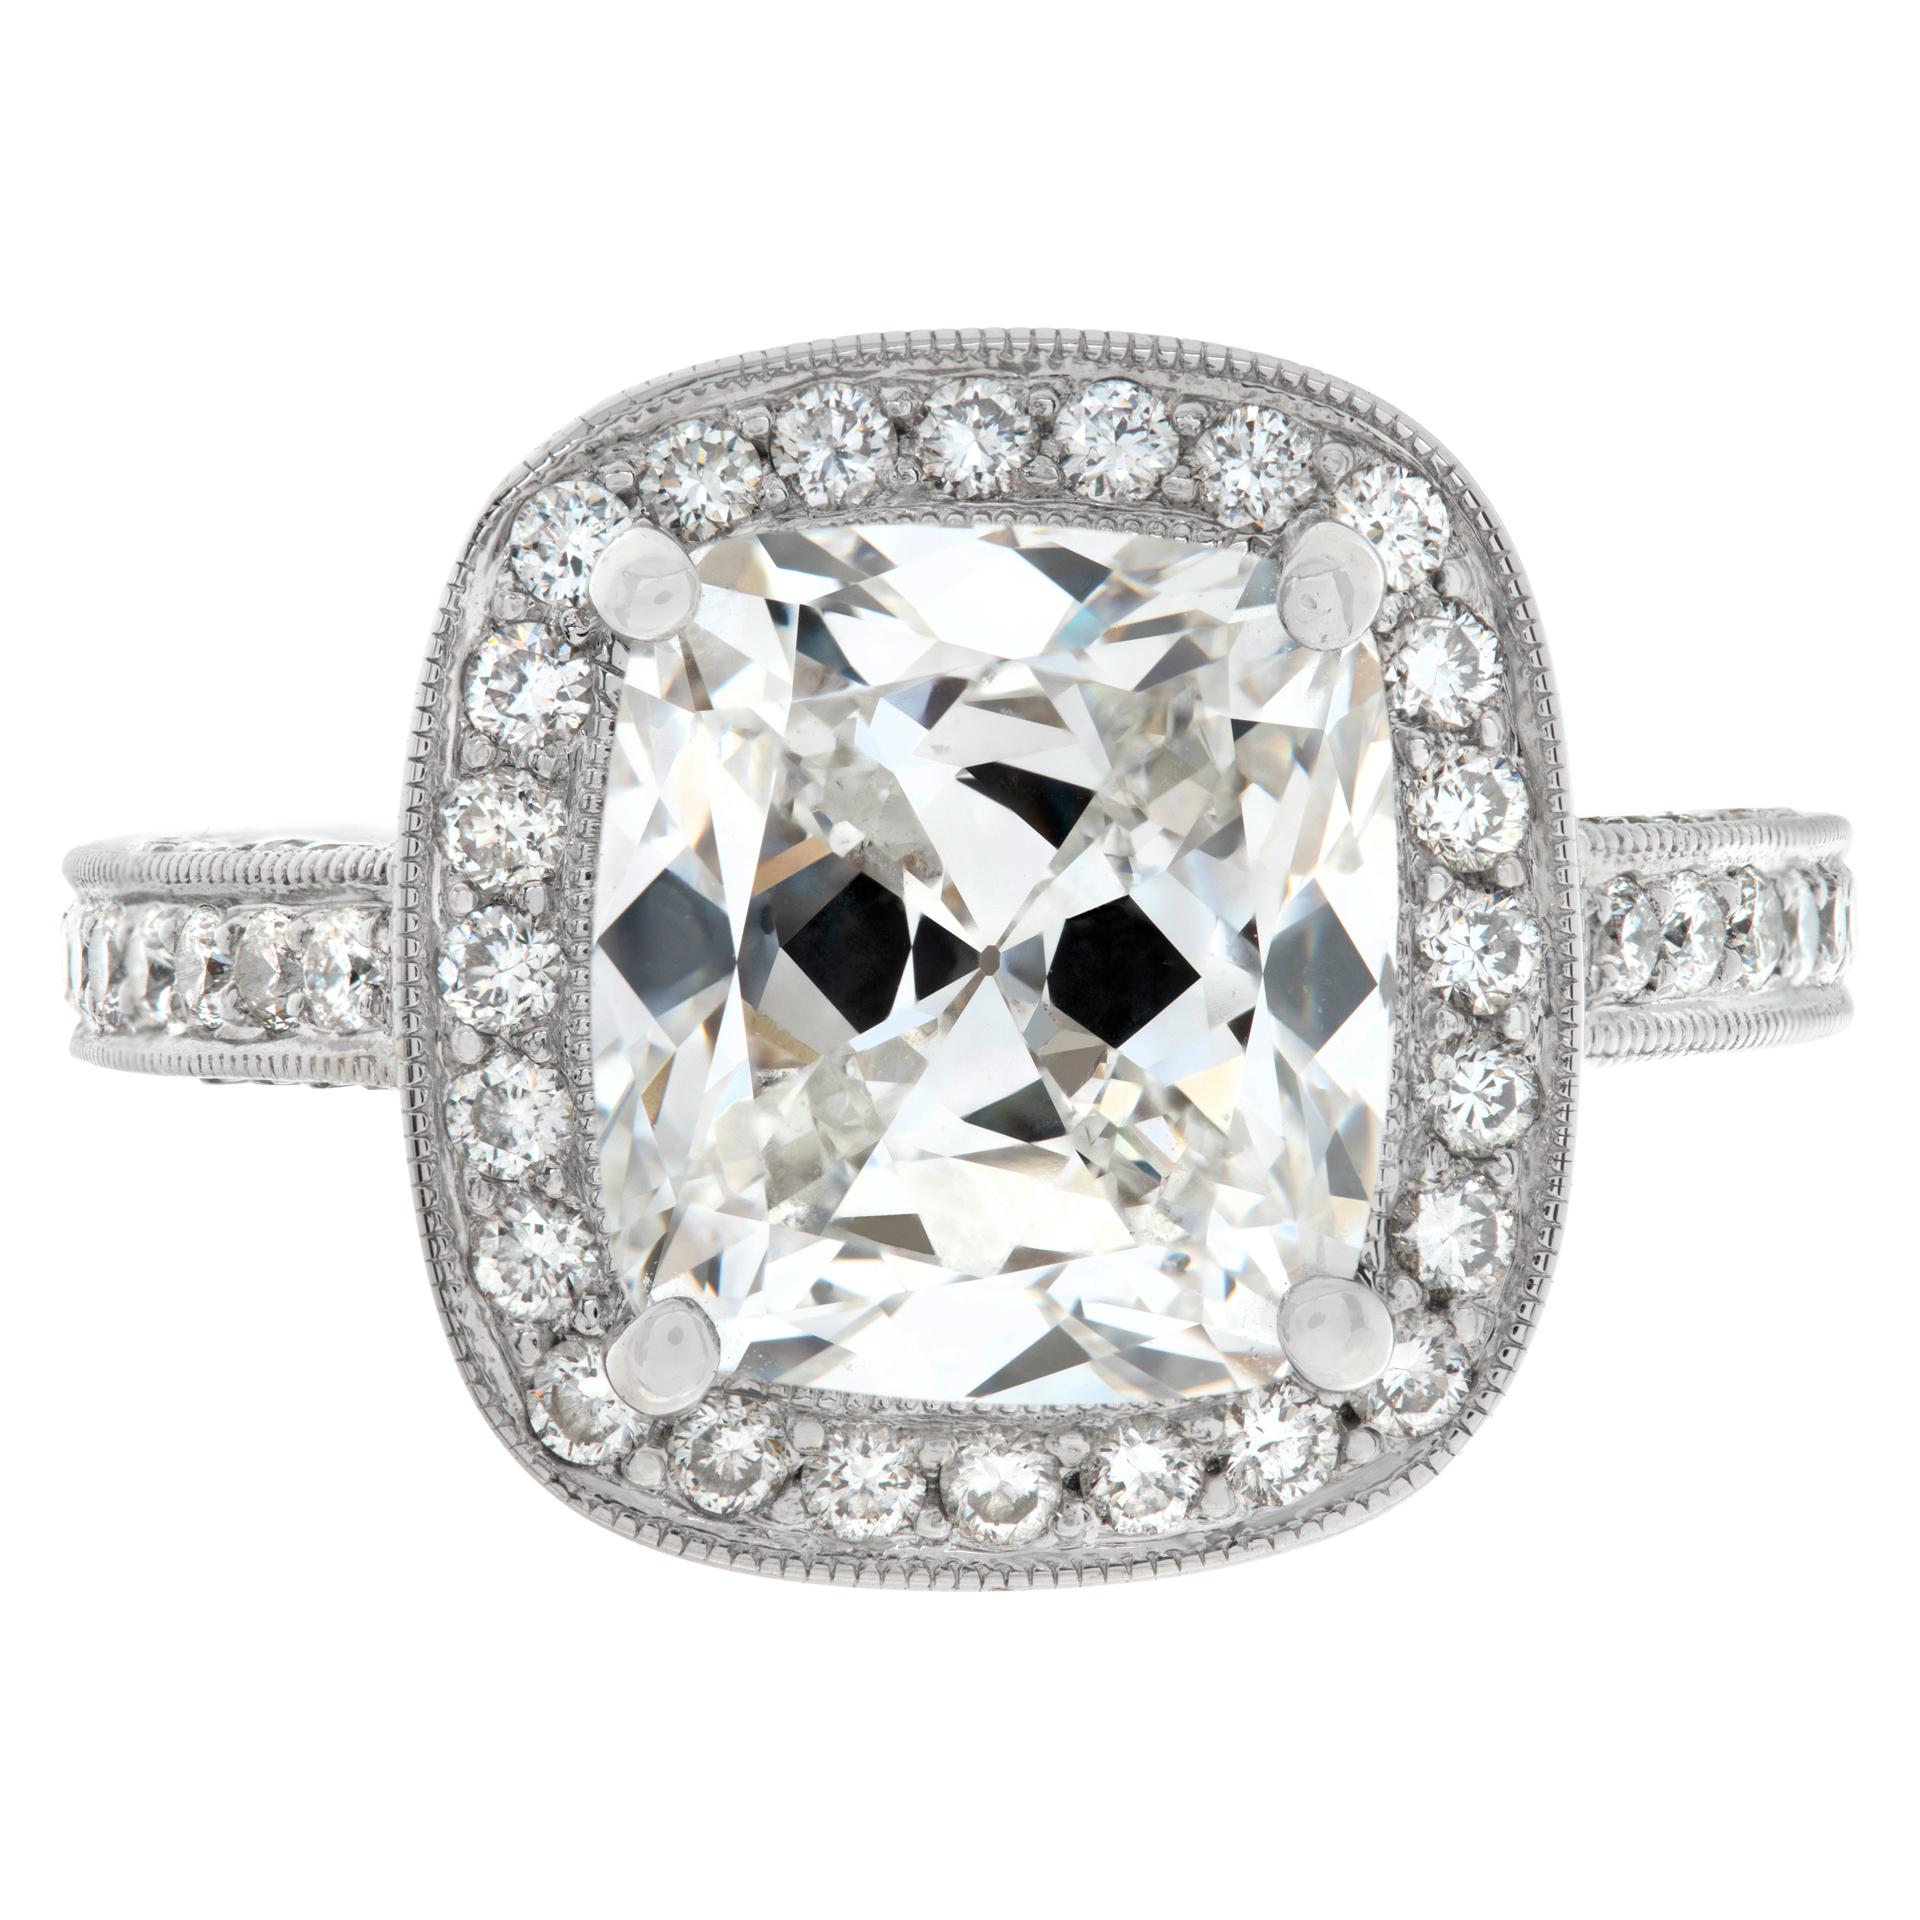 GIA certified cushion modified brilliant cut diamond 5.17 carat ( G color, SI2 clarity) ring mounted in 18k white gold diamonds setting. Round brilliant cut diamonds total approx. weight: 1.50 carat, estimate G color- VS/SI clarity. 5/8 x 5/8 inches